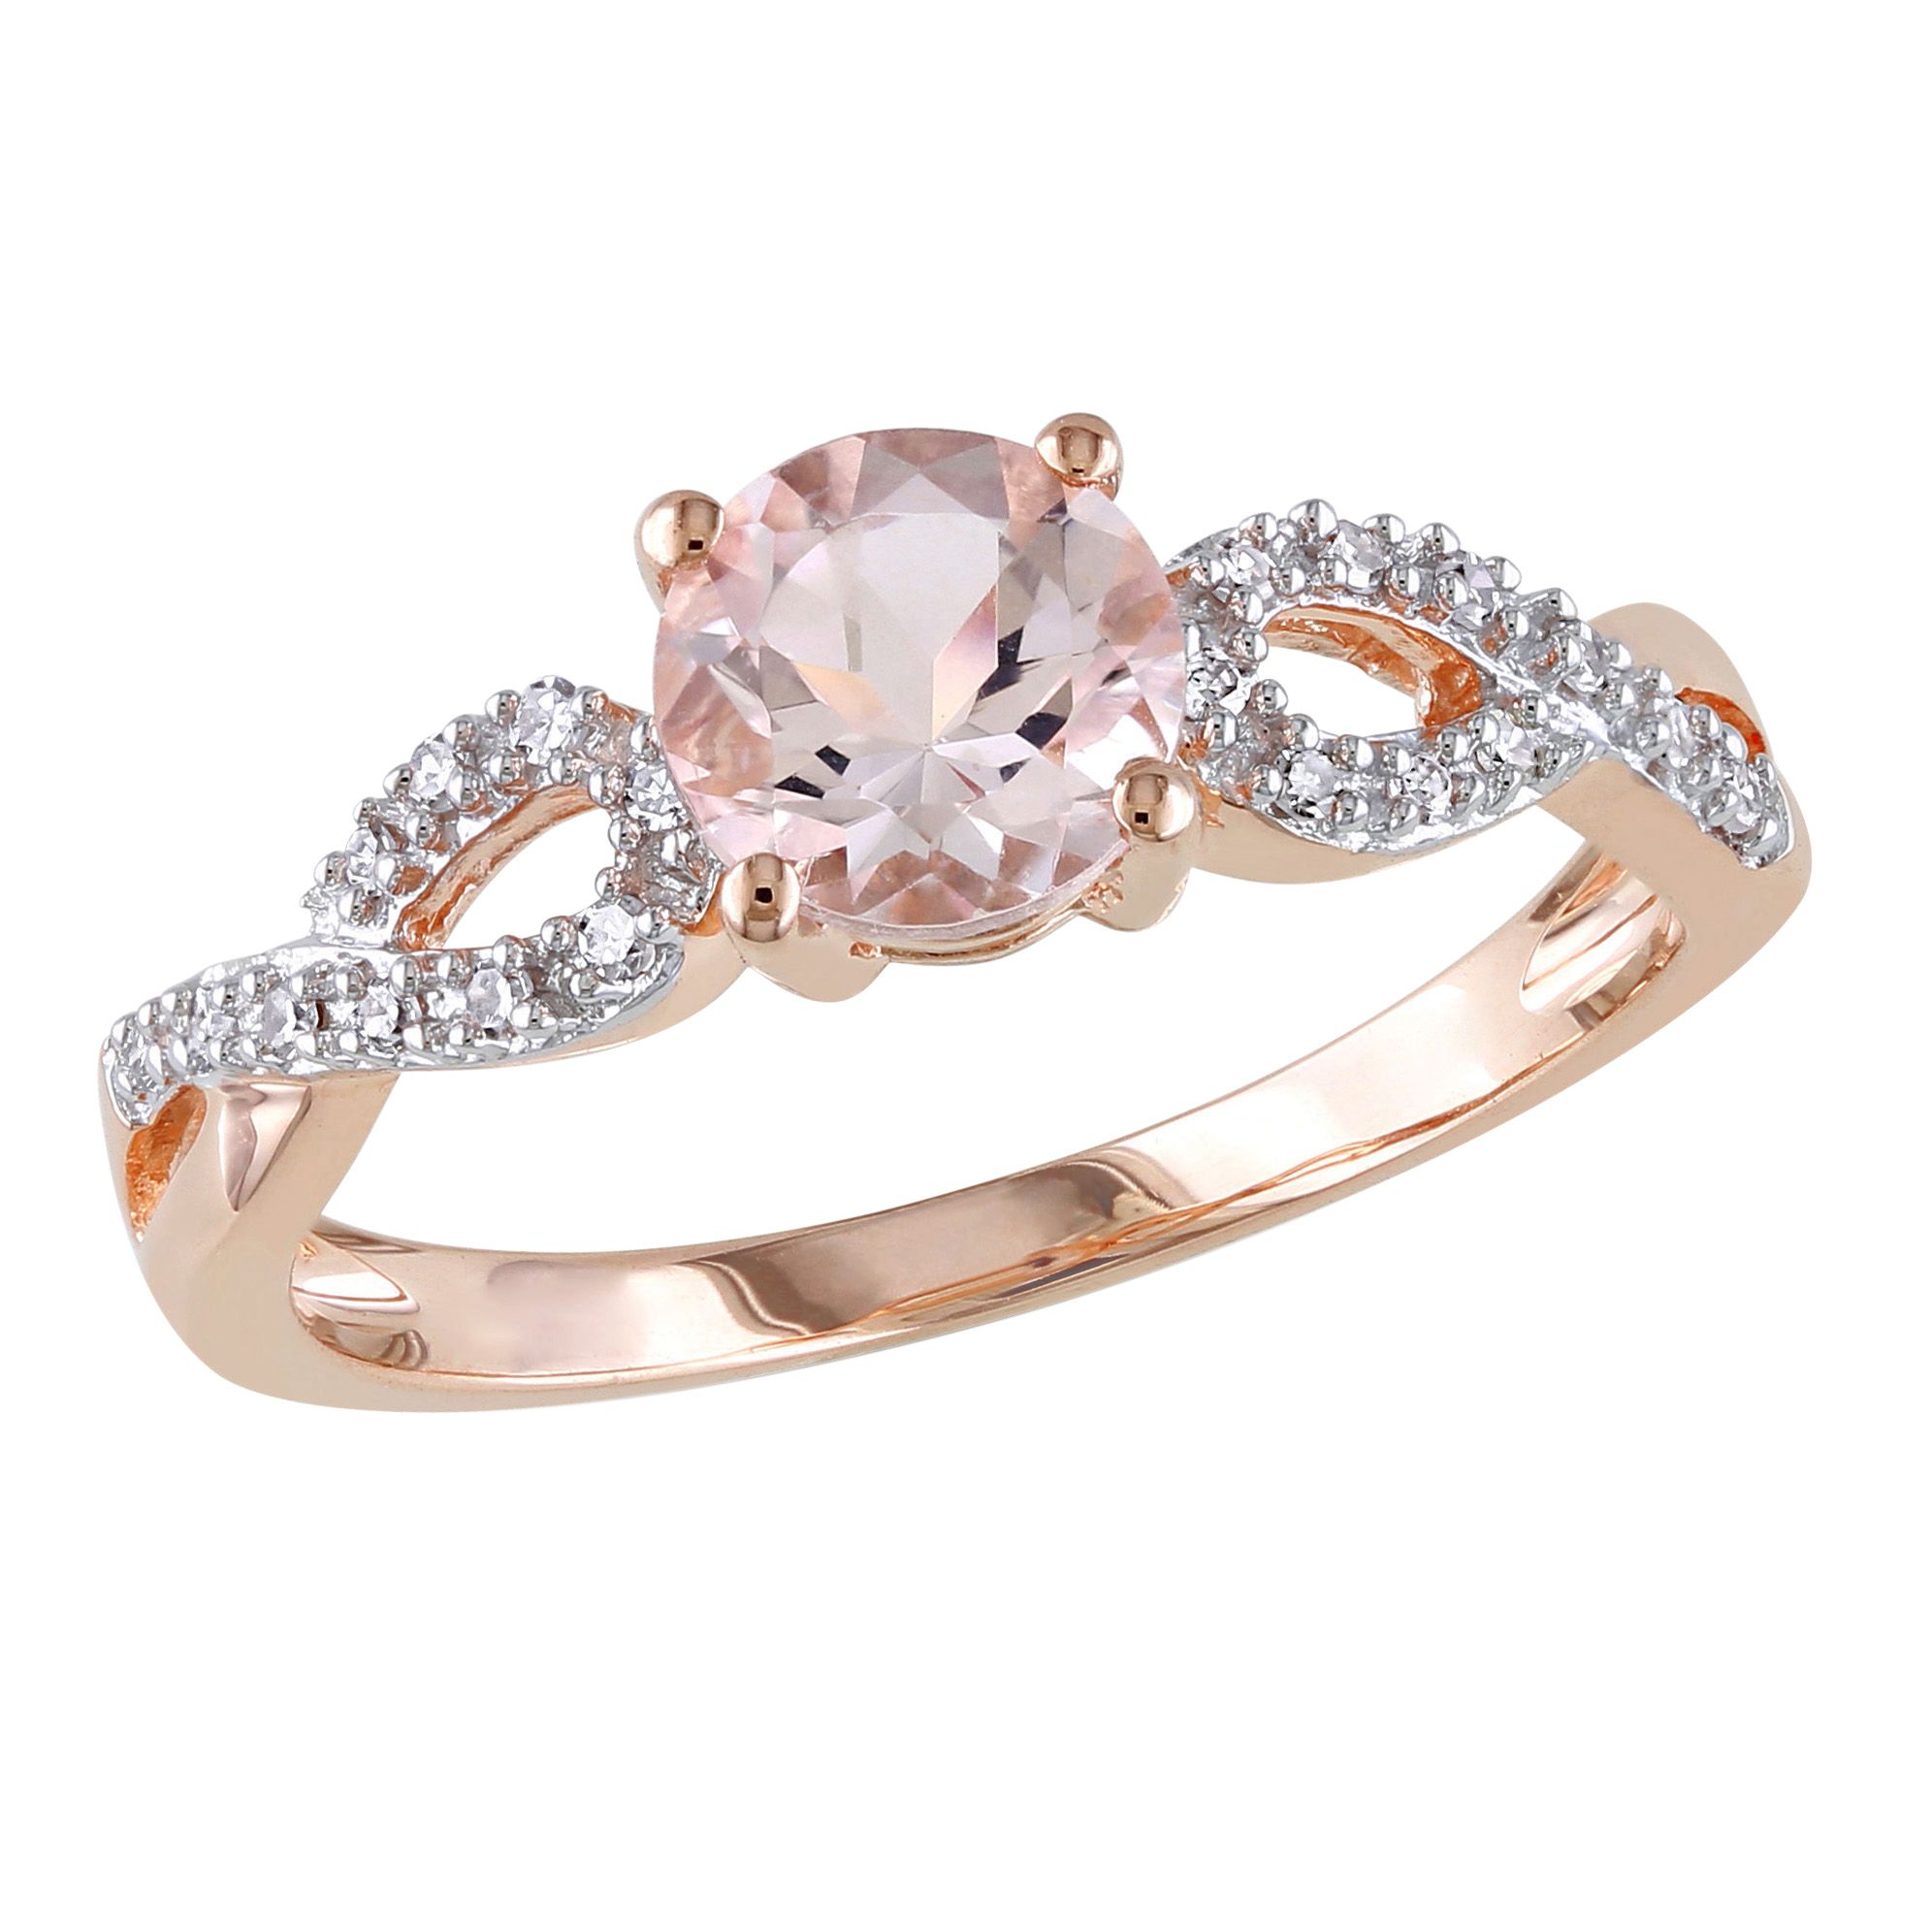 0.8 ct. t.g.w. Morganite and 0.1 ct. t.w. Diamond Infinity Engagement Ring in 10k Rose Gold, Size 4